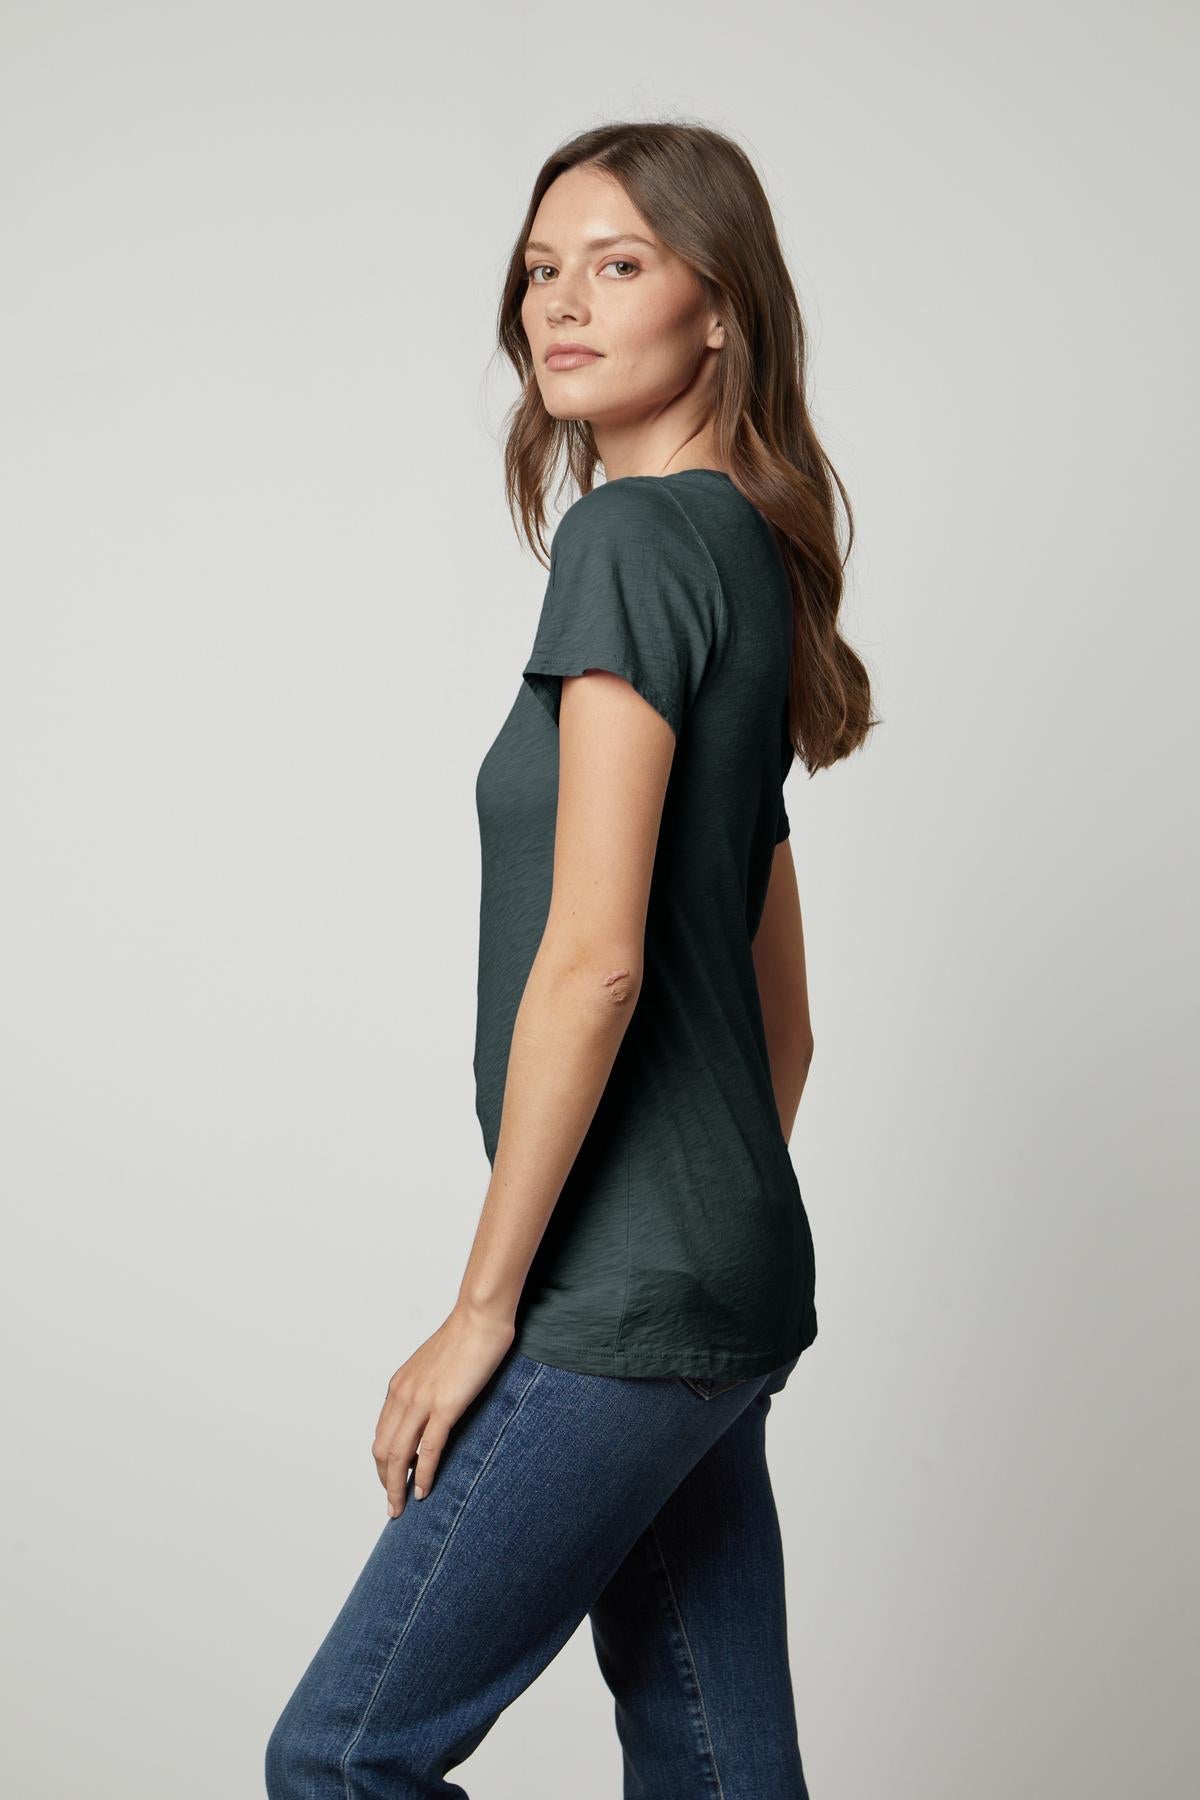 A woman rocking a tomboy style in a dark green Velvet by Graham & Spencer LILITH COTTON SLUB V-NECK TEE and jeans.-35782981681345